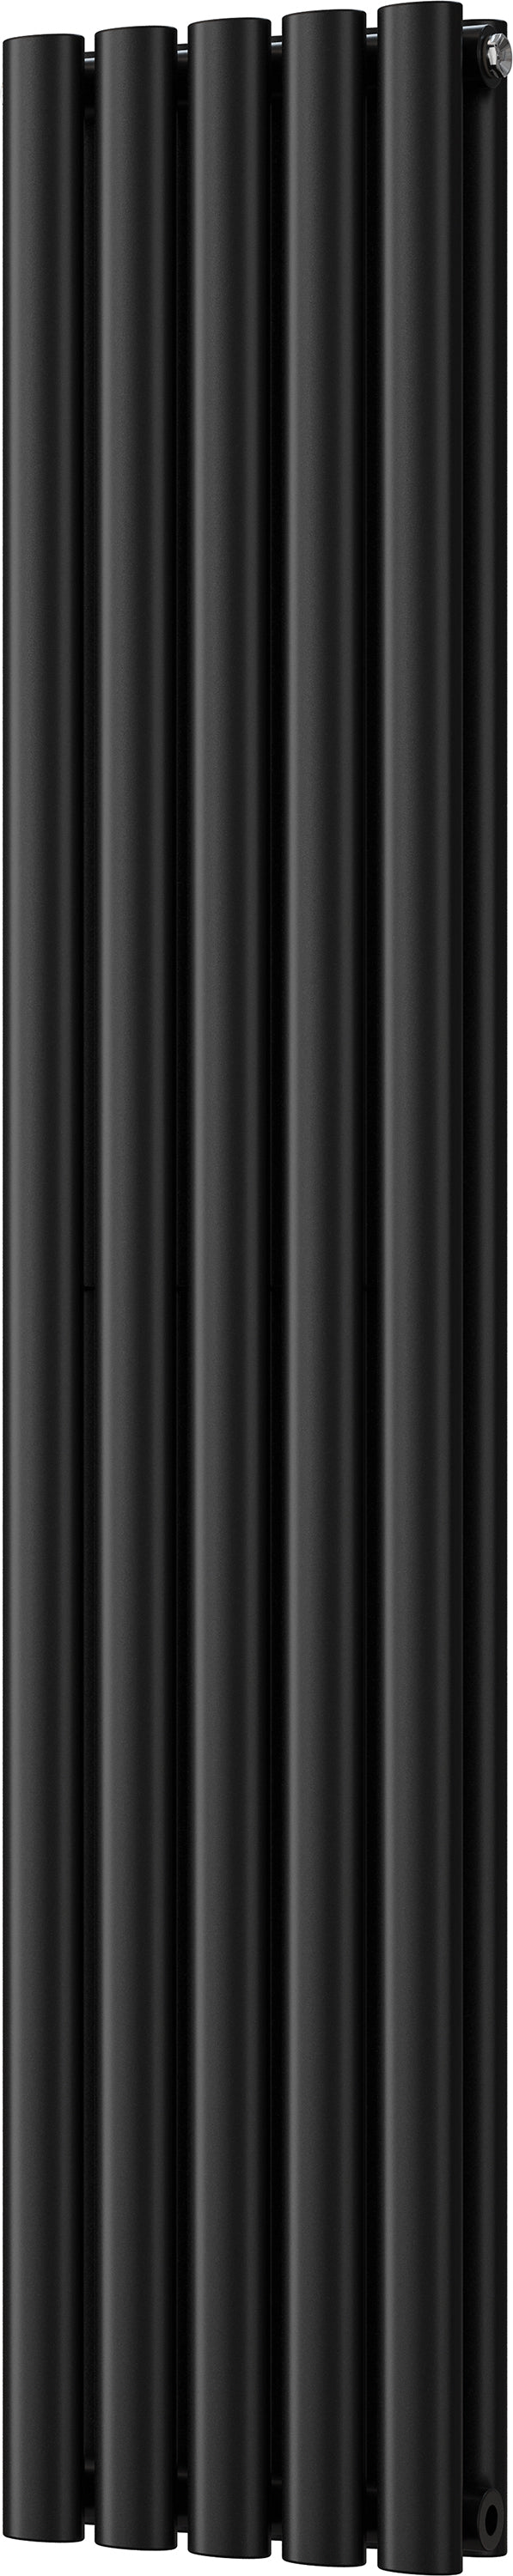 Omeara - Black Vertical Radiator H1400mm x W290mm Double Panel